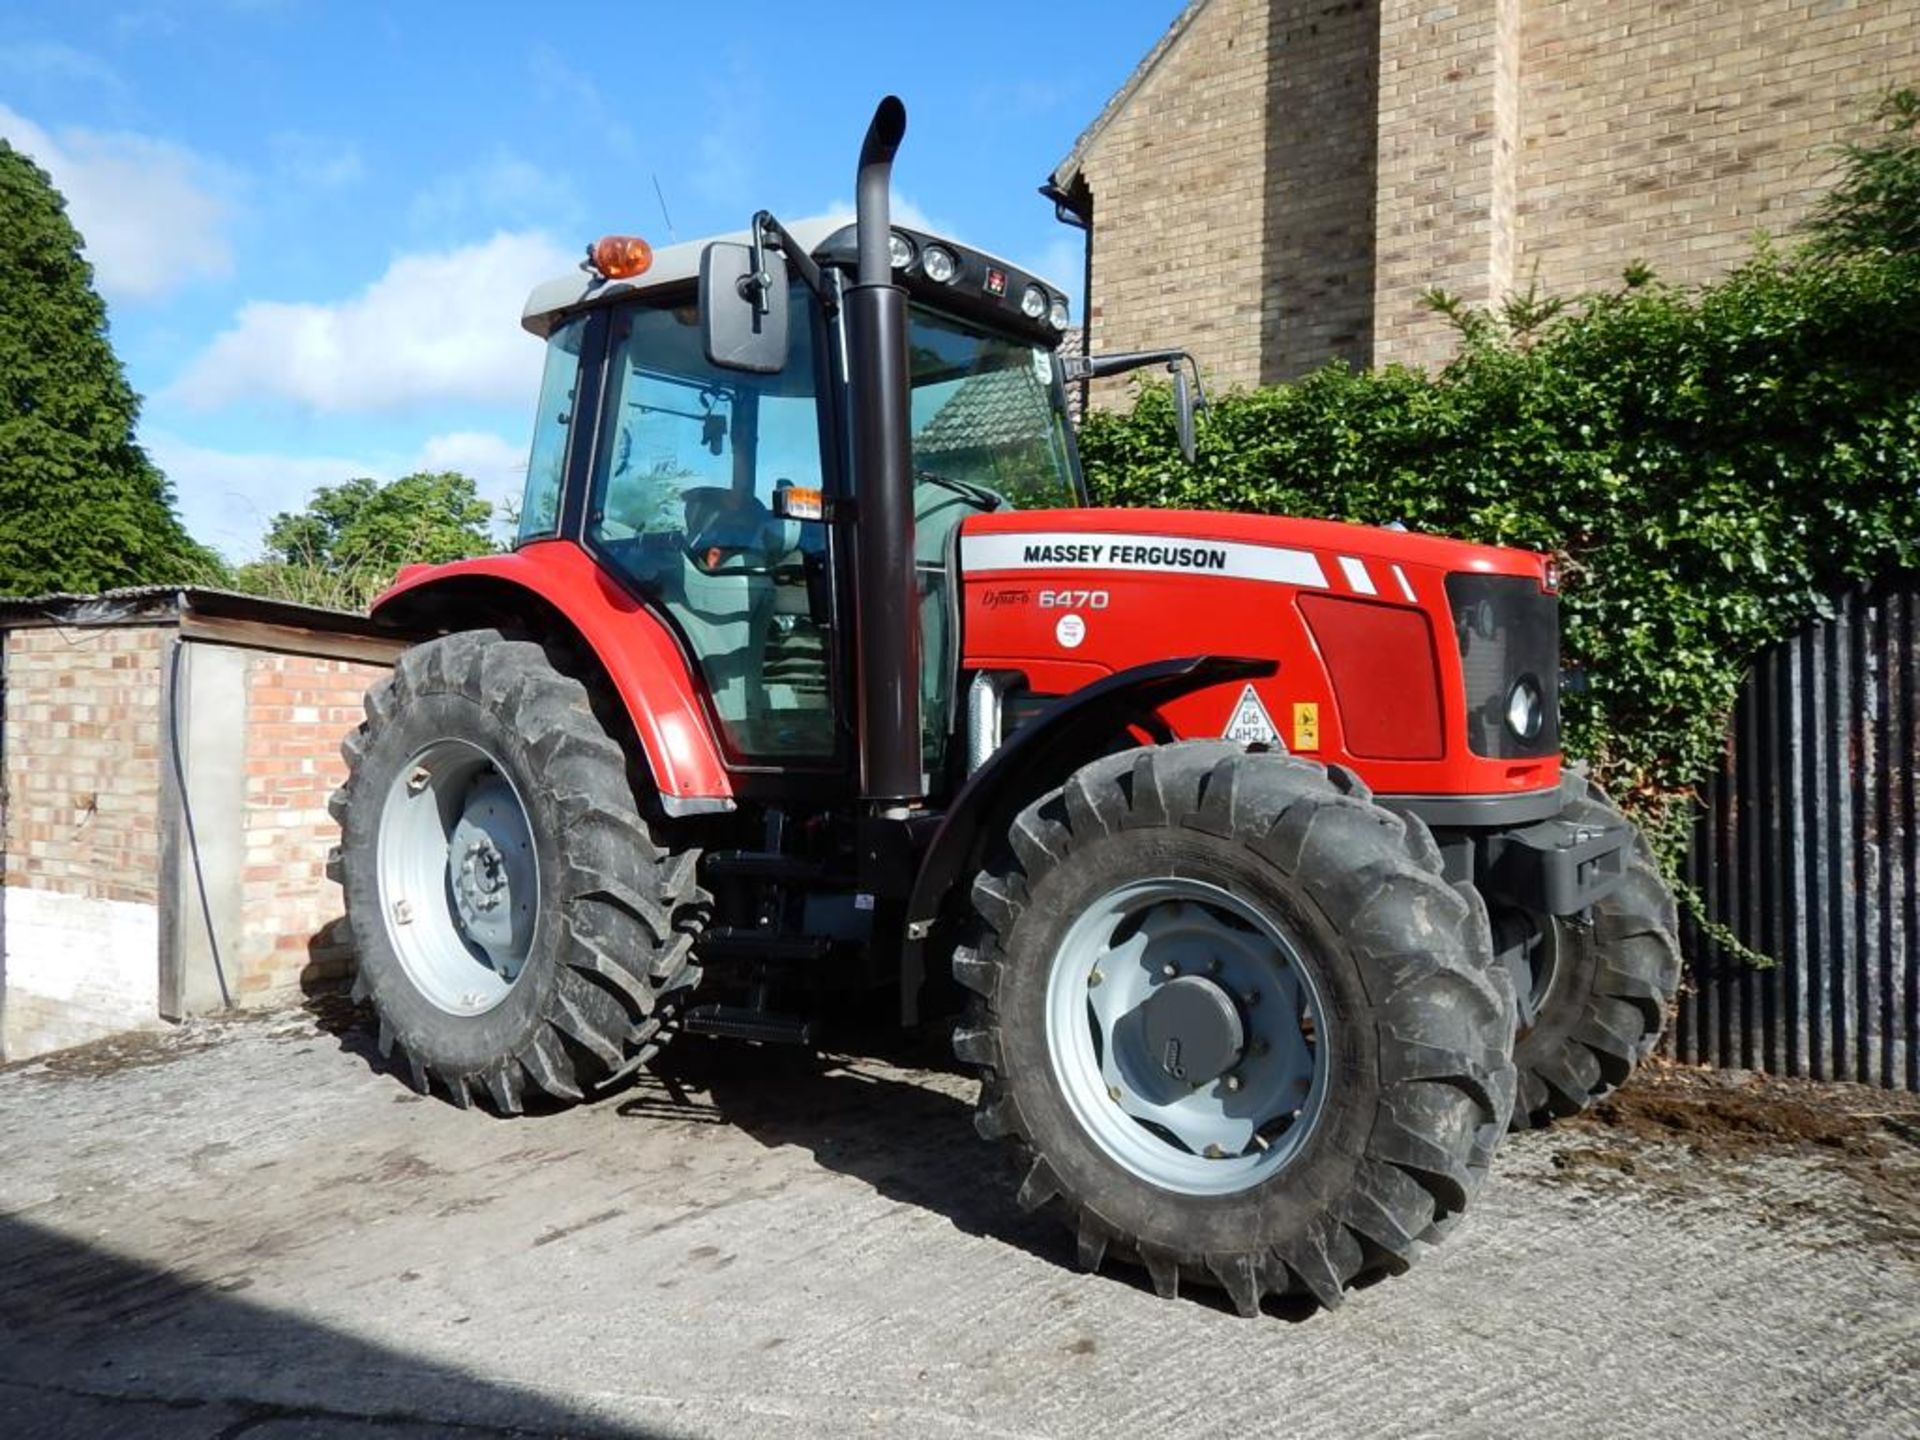 2013 MASSEY FERGUSON 6470 Dyna-6 40kph 4wd TRACTOR With front and cab suspension on 18.4R34 rear and